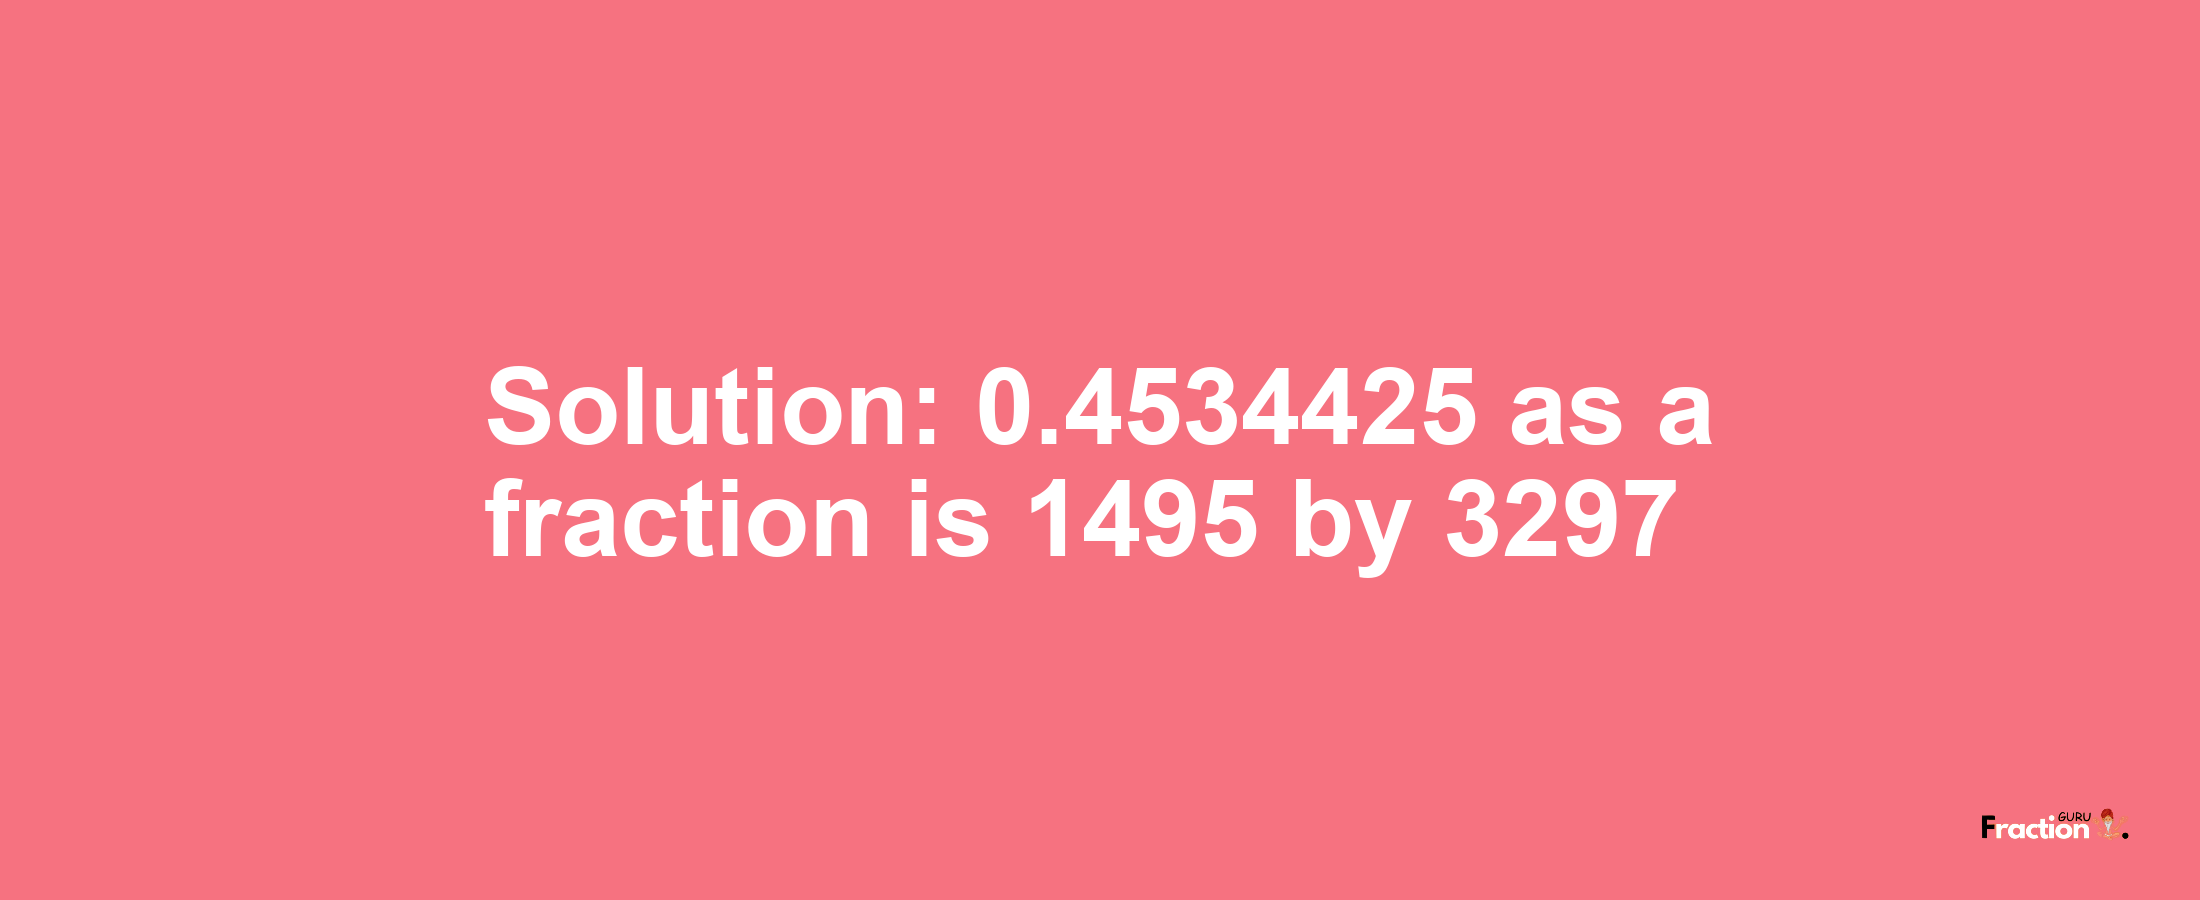 Solution:0.4534425 as a fraction is 1495/3297